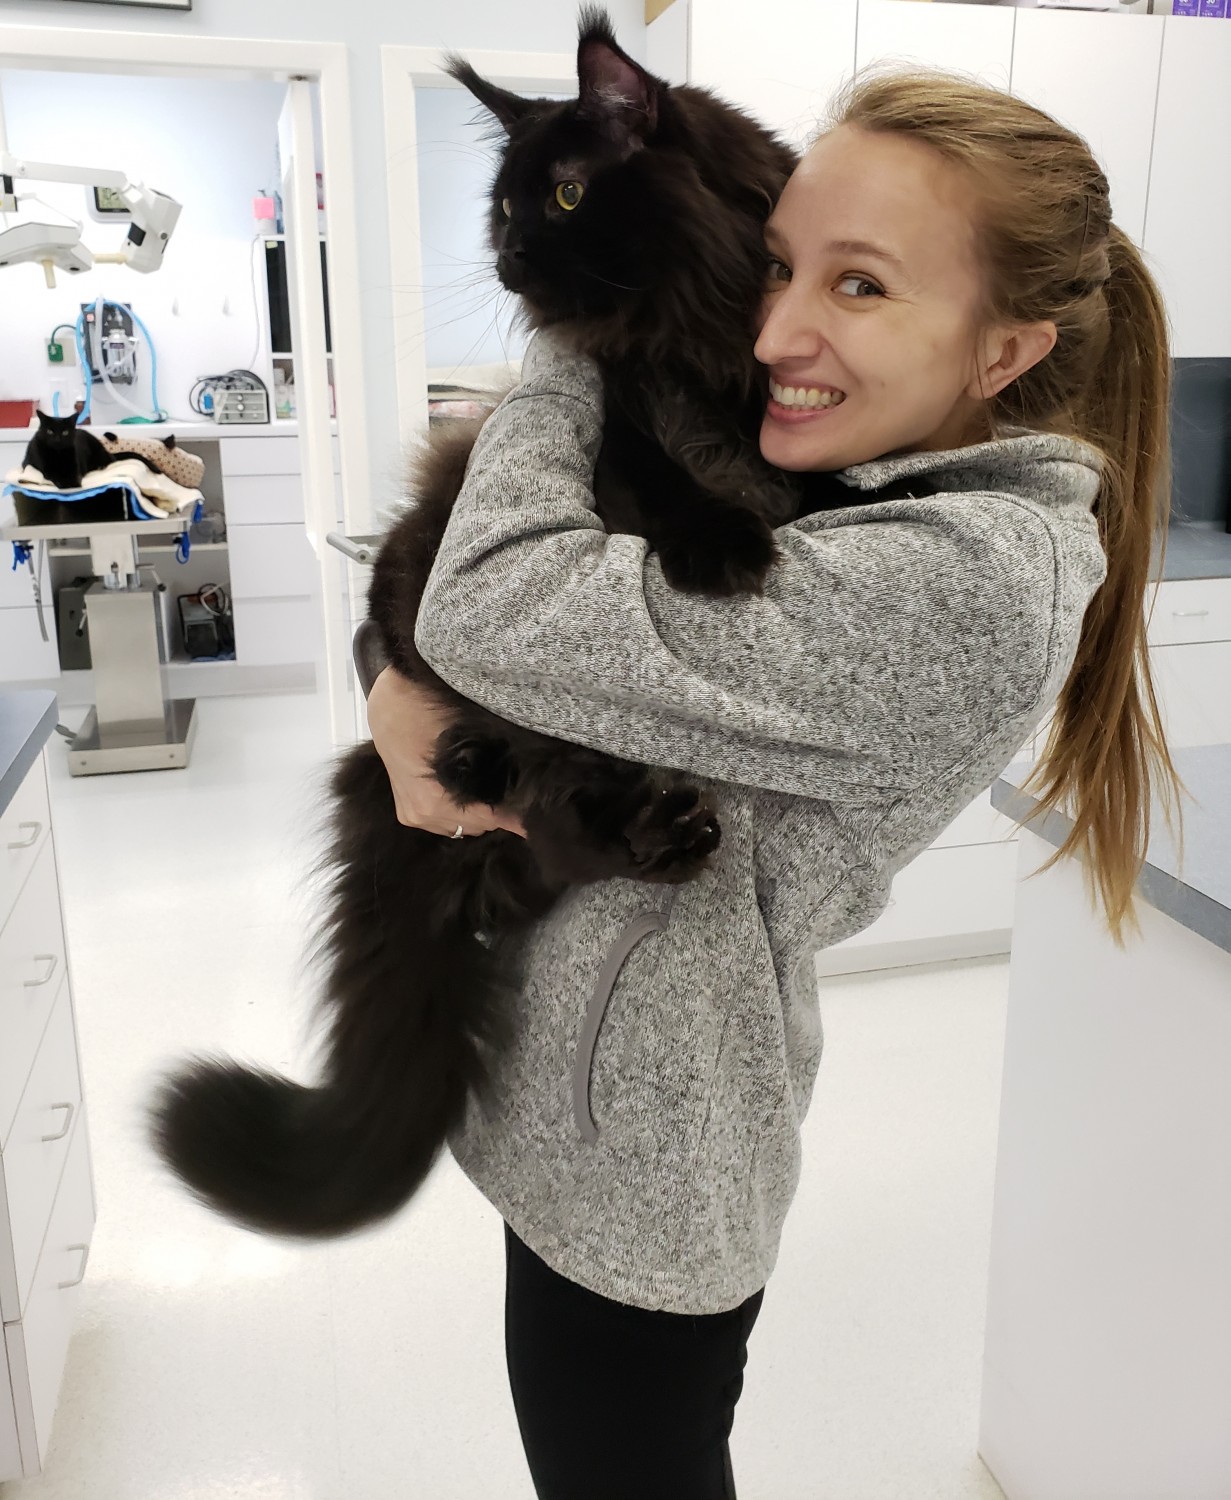 Exclusively Cats Veterinary Hospital - Waterford, MI - Dr. Kaitlin Bahlmann